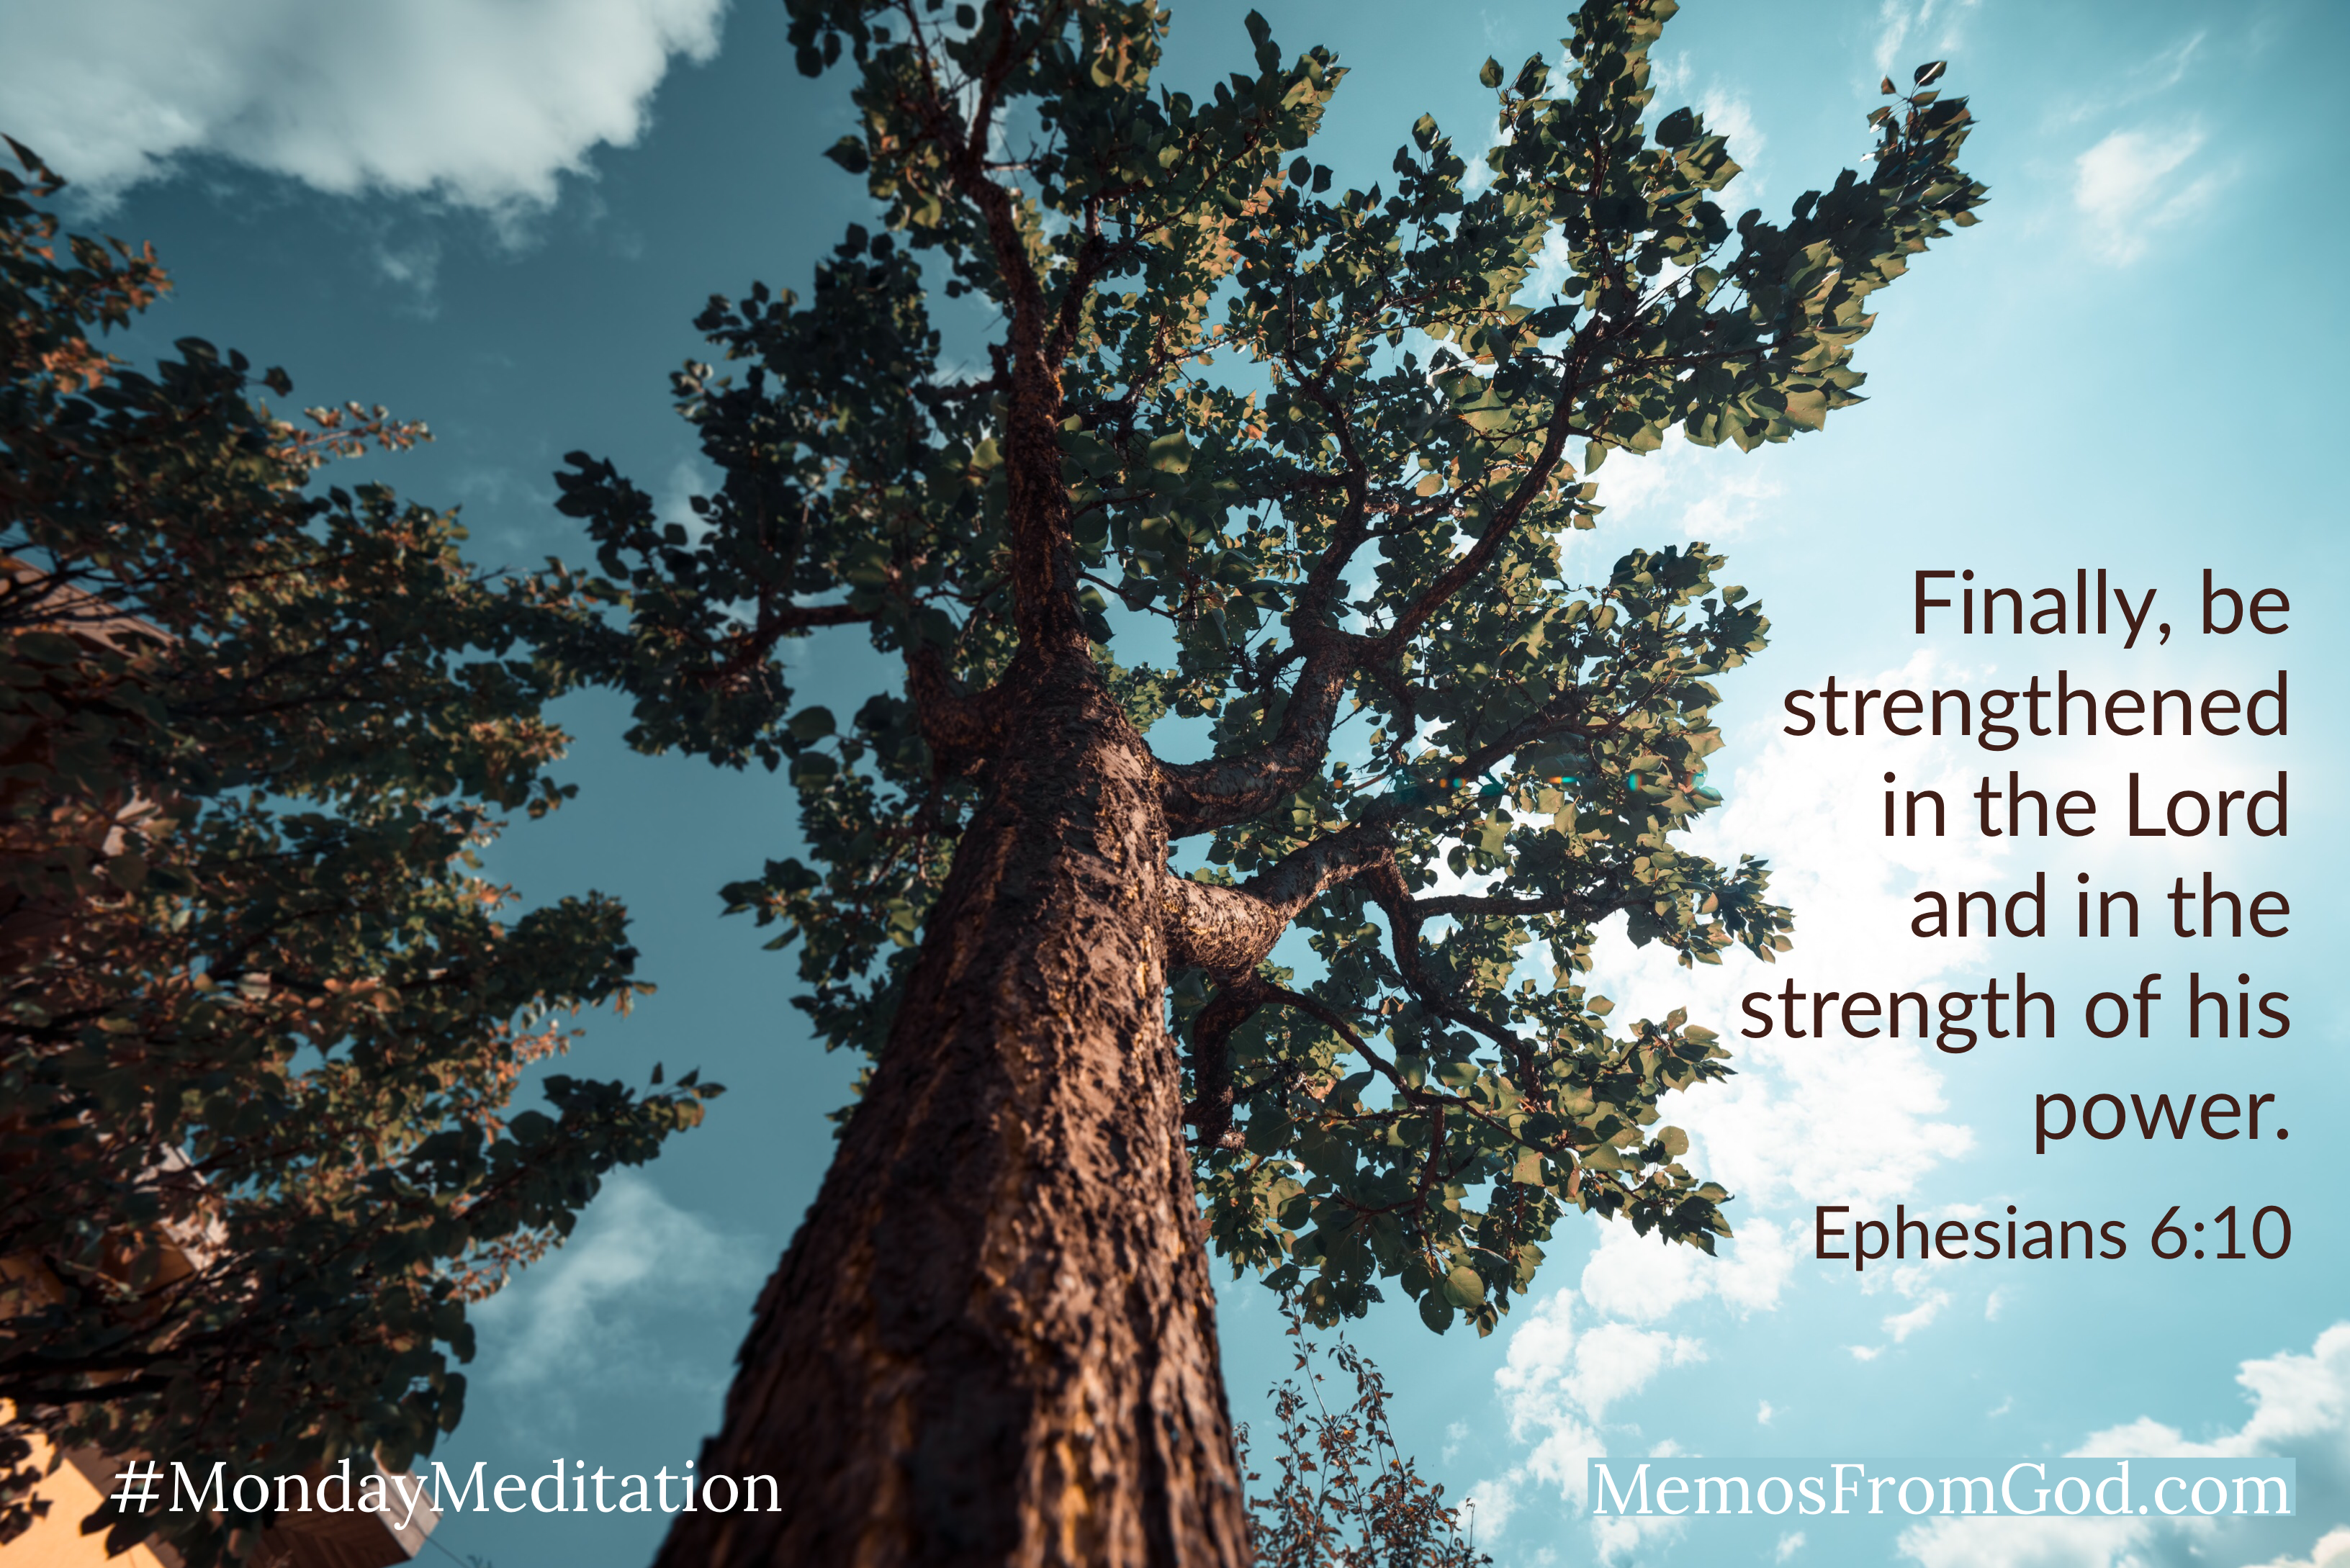 Looking up from the bottom to the top of a tall tree along the rough trunk. Dark green leaves are high in the air. Caption: Finally, be strengthened in the Lord and in the strength of his power. Ephesians 6:10